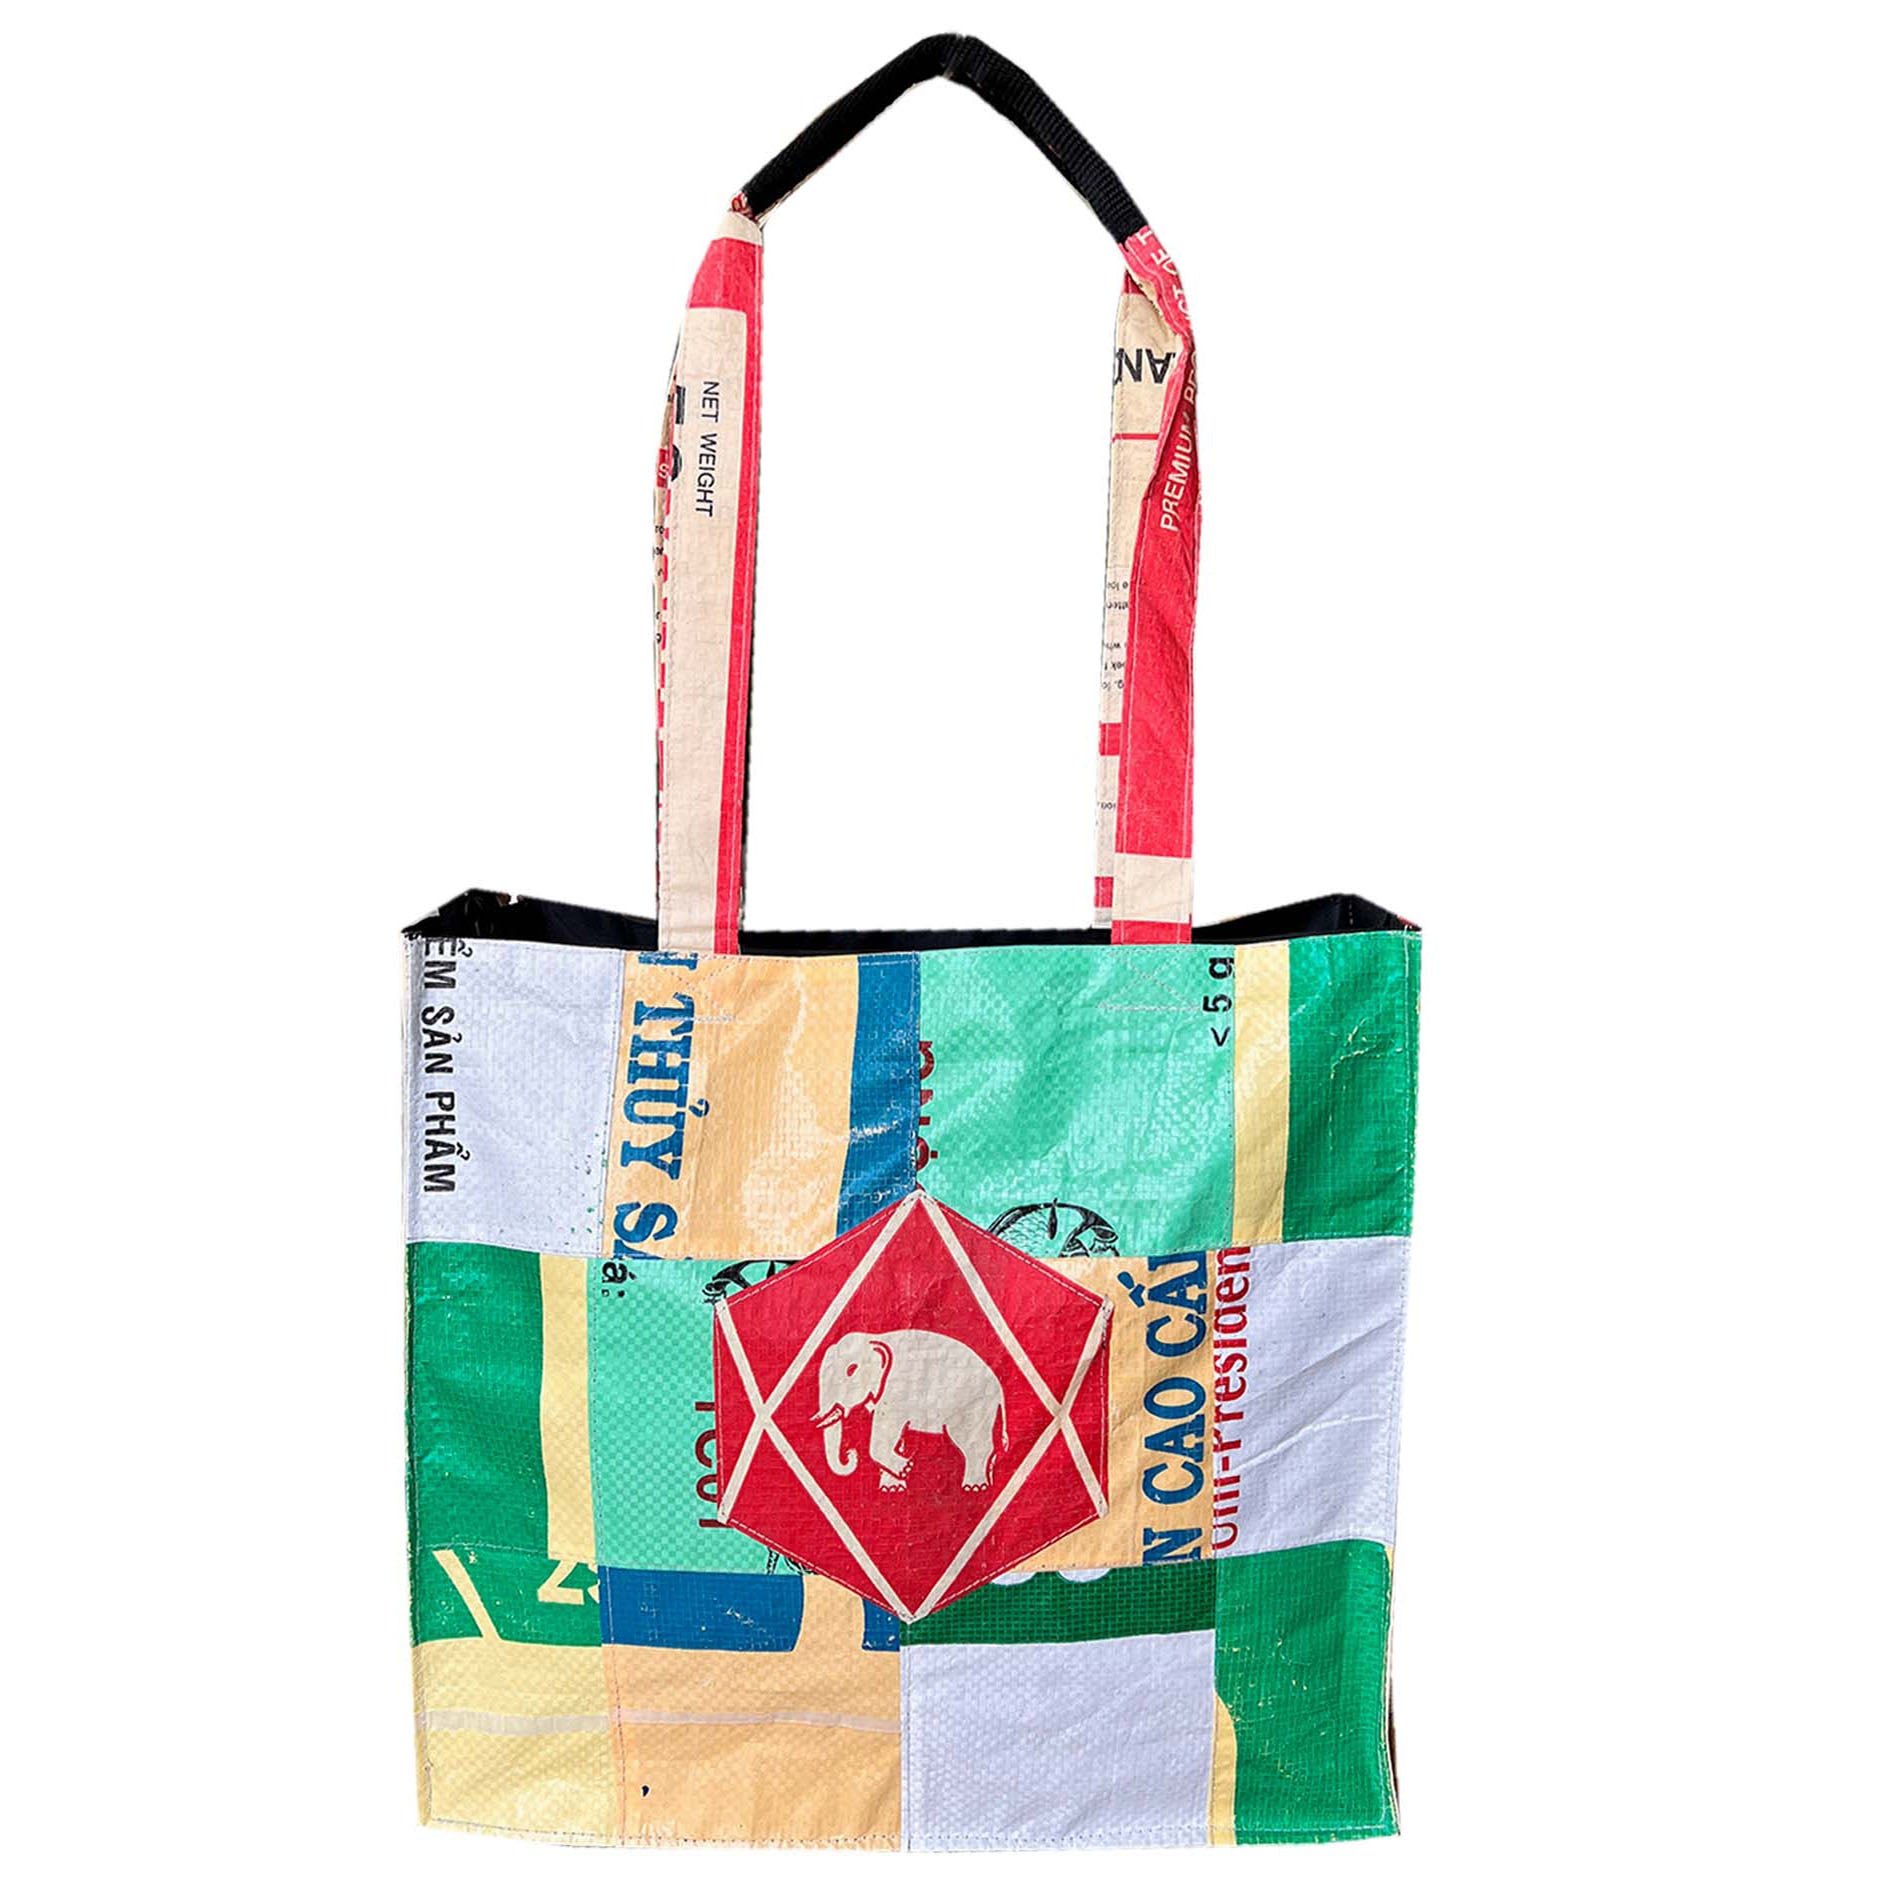 Recycled material multicolour tote bag with zip, recycled material tote bag, eco friendly tote bag UppyBags  Edit alt text